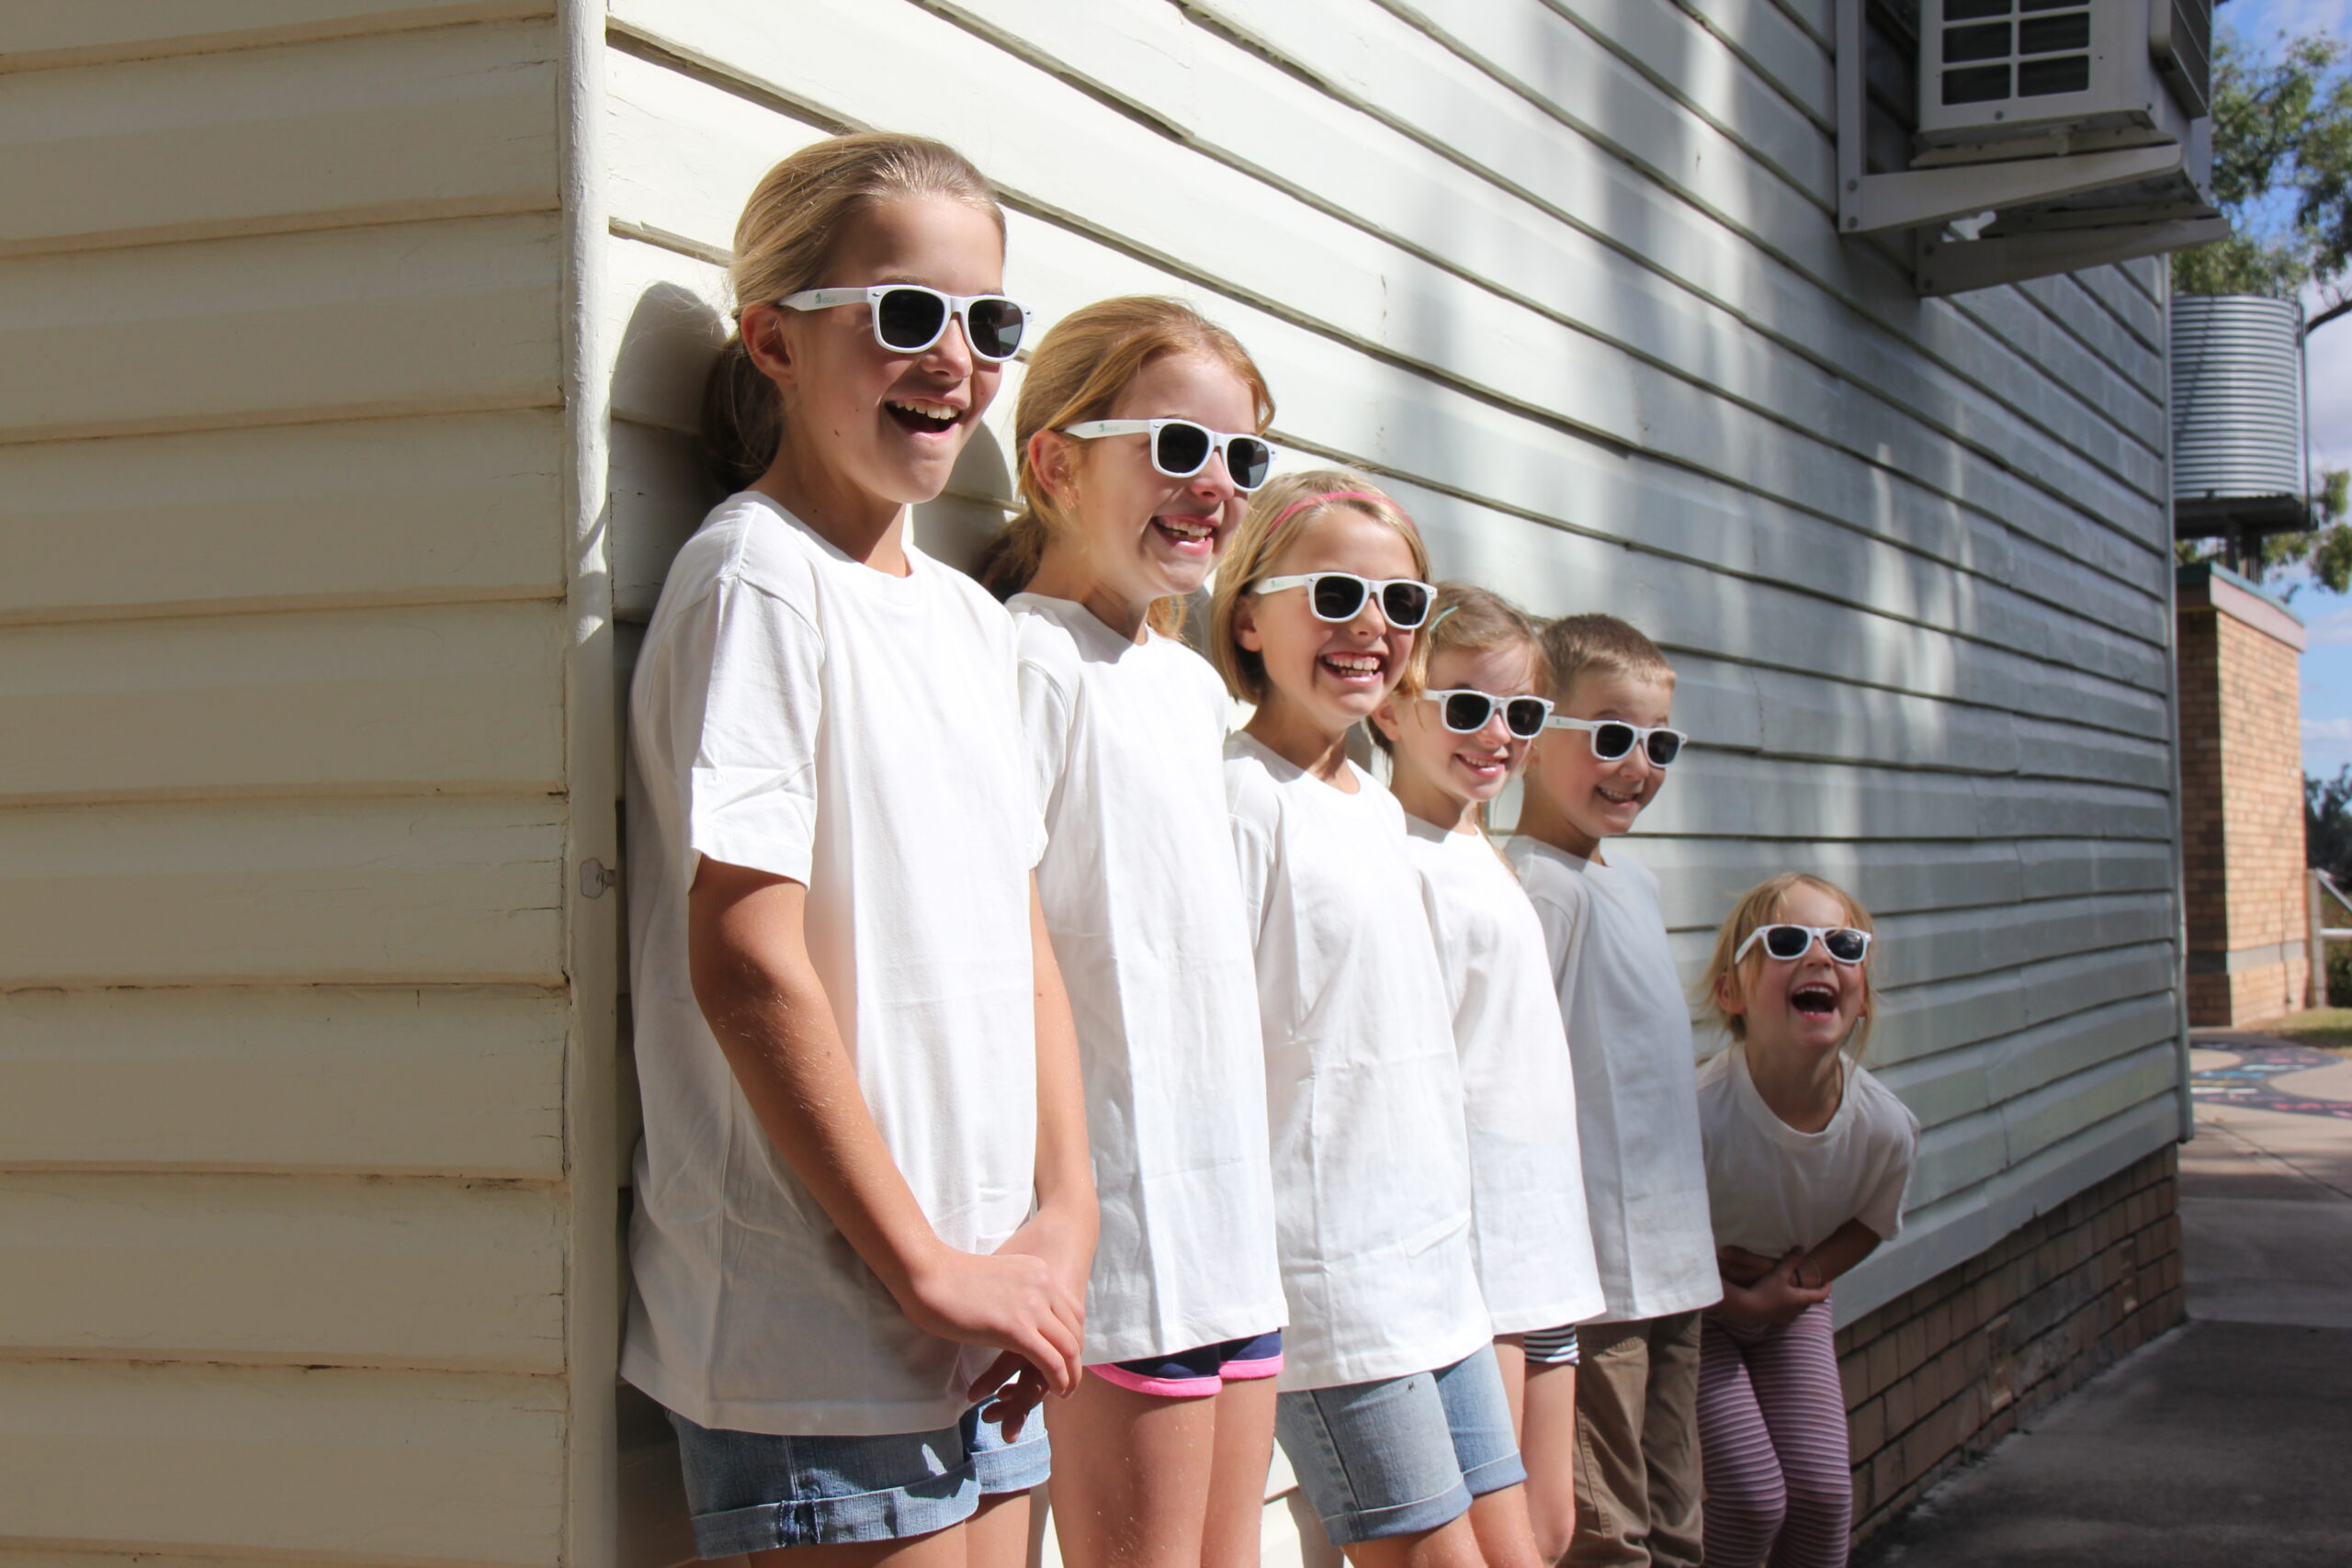 Before the colour run: Fairfax Public School students Eileen Murphy, Chelsea Nobilo, Molly Murphy, Grace Nobilo, Jackson Smith and Ella Smith in their white sunglasses and shirts, donated by NDCAS.